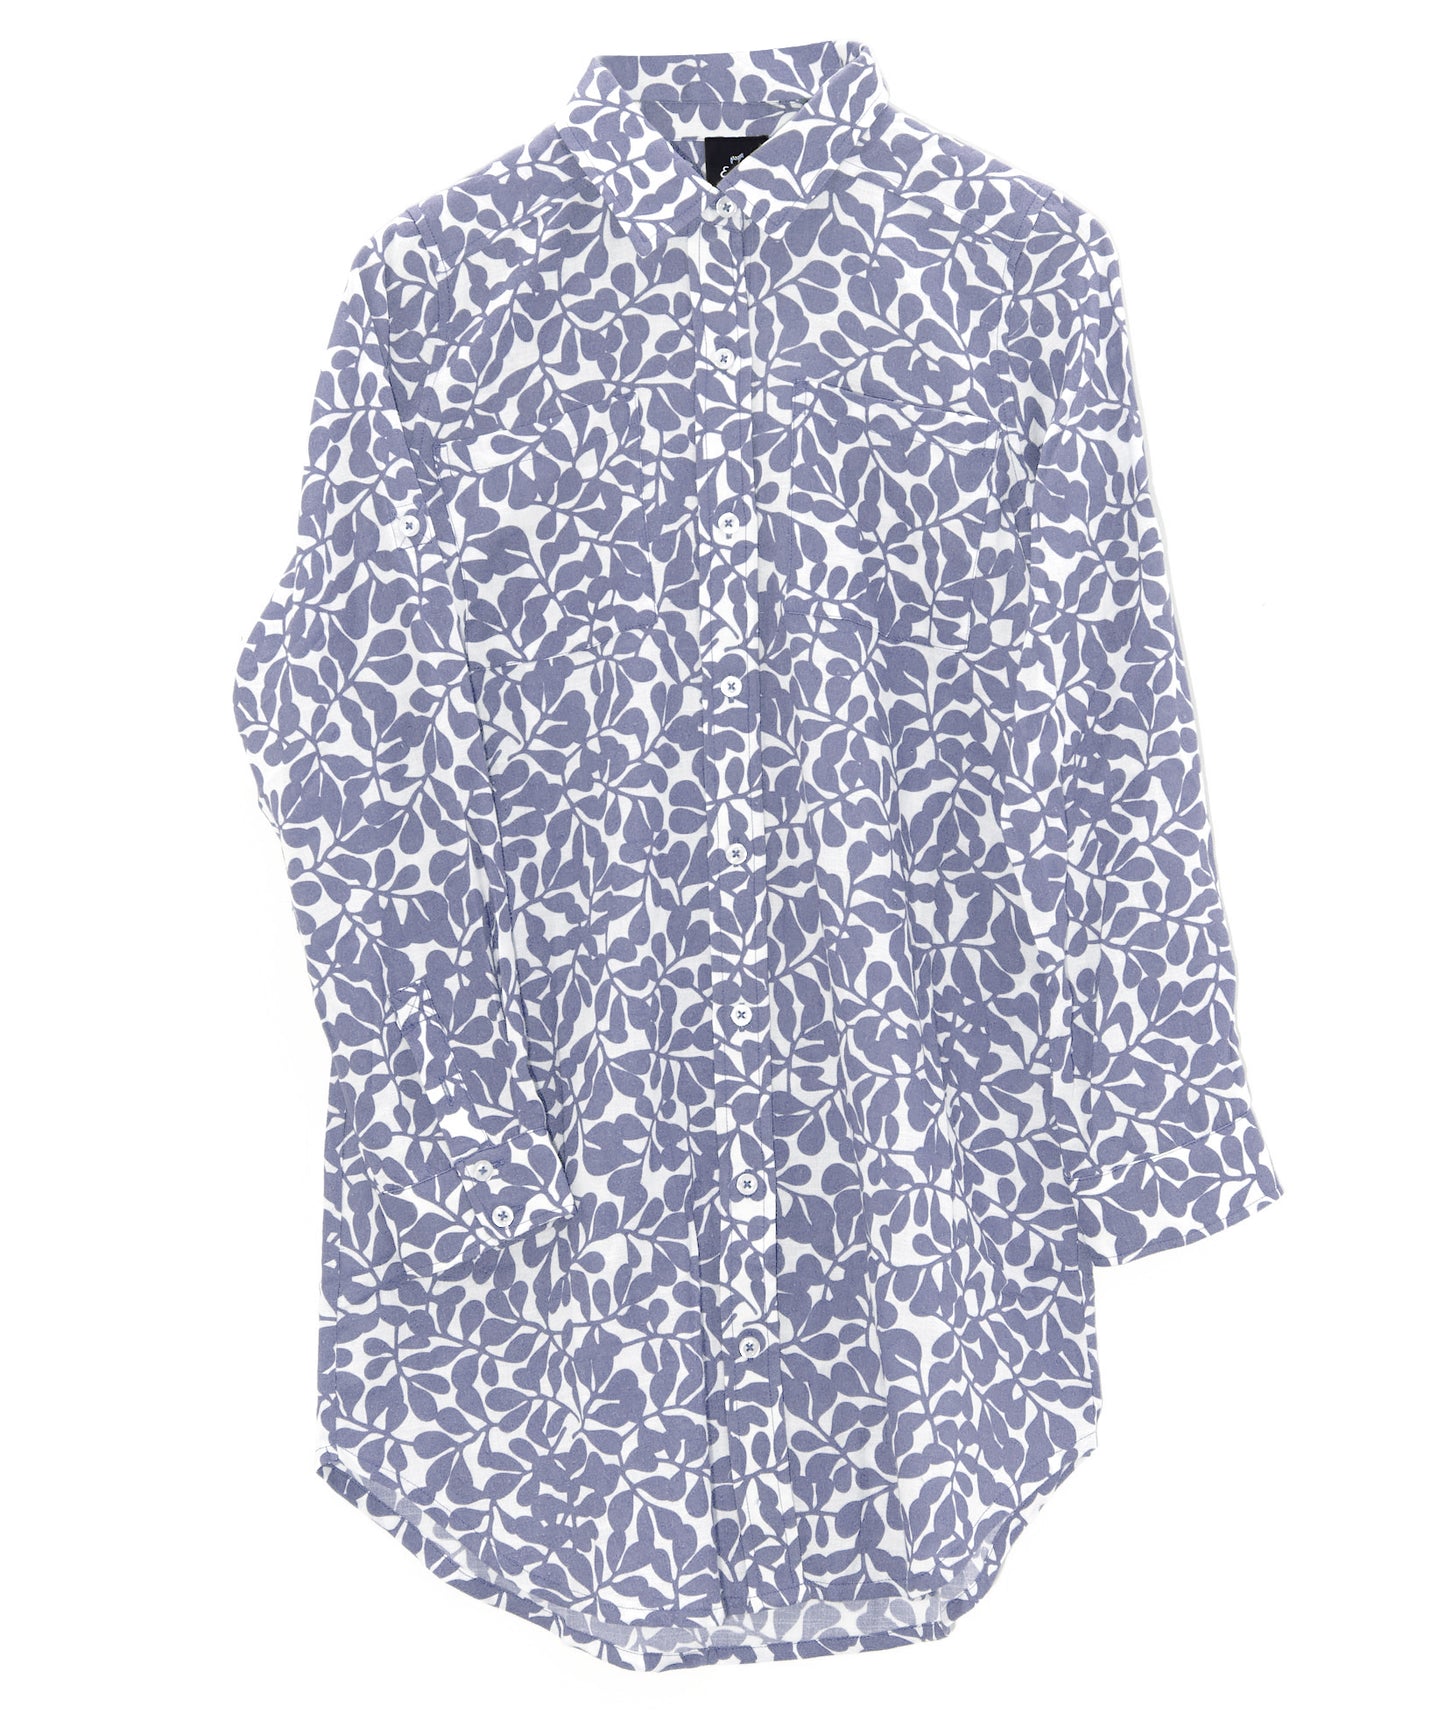 Climbing Vines Shirt Dress in color Infinity Blue